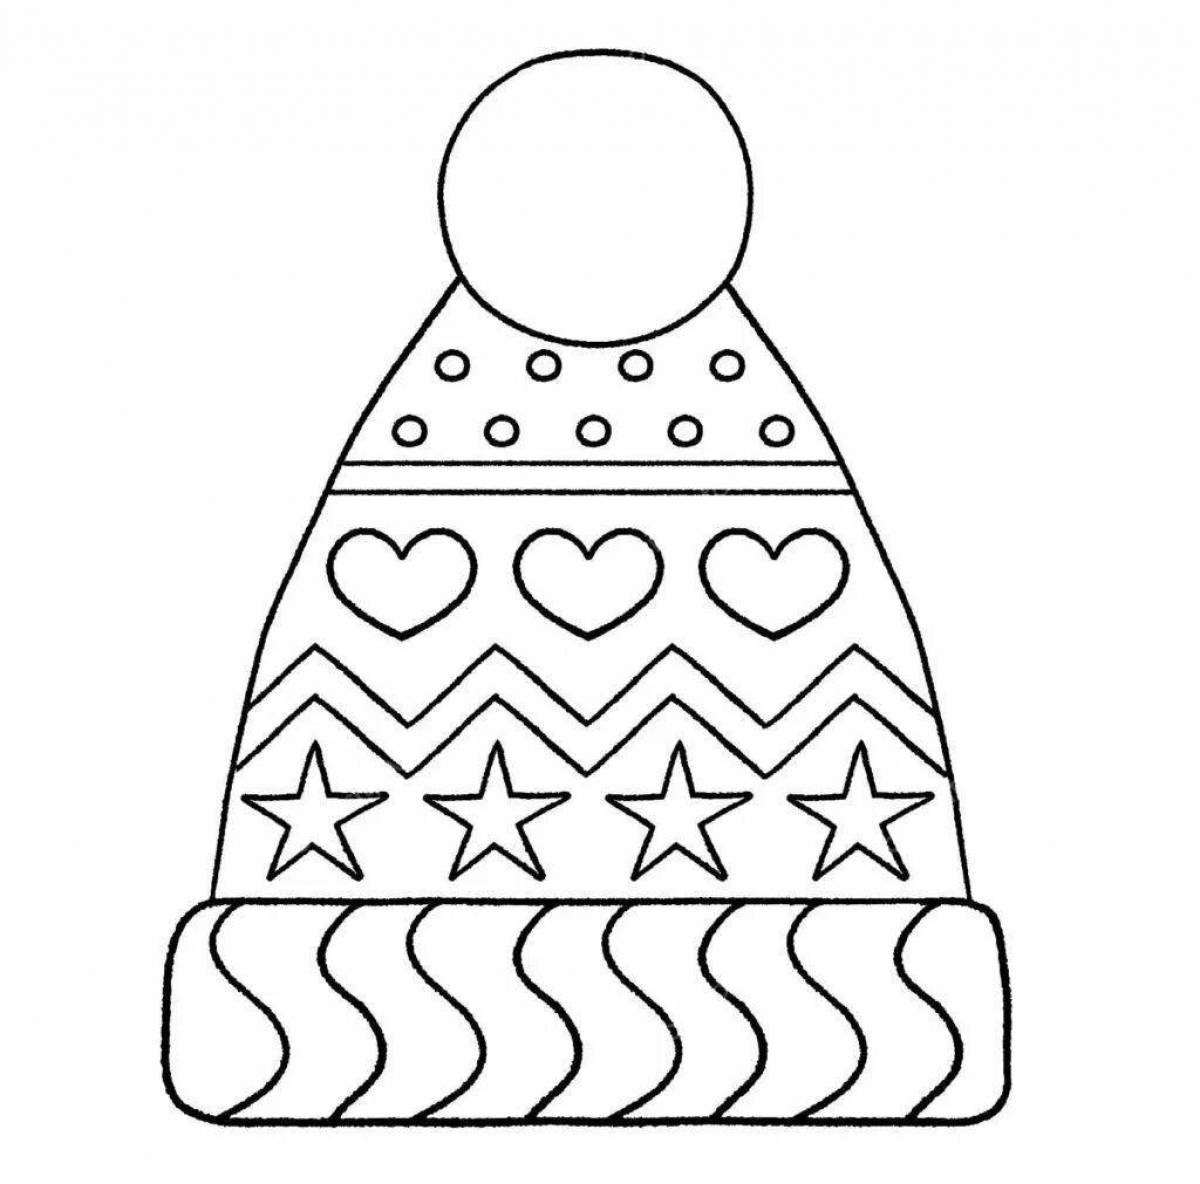 Coloring page cute hat for children 2-3 years old